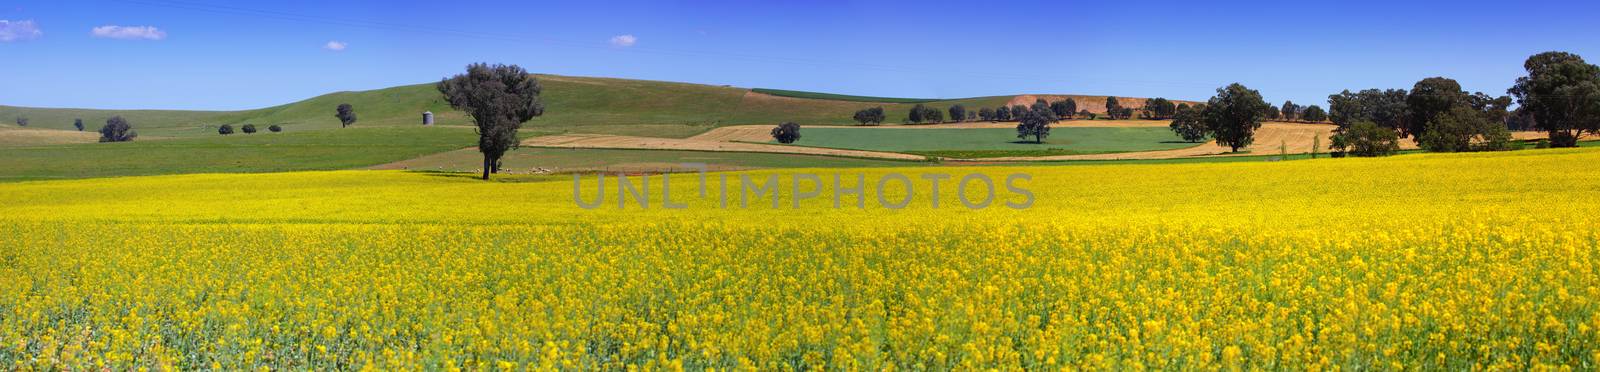 Flowering canola and cultivated wheat and tilled crops of farmland in country NSW